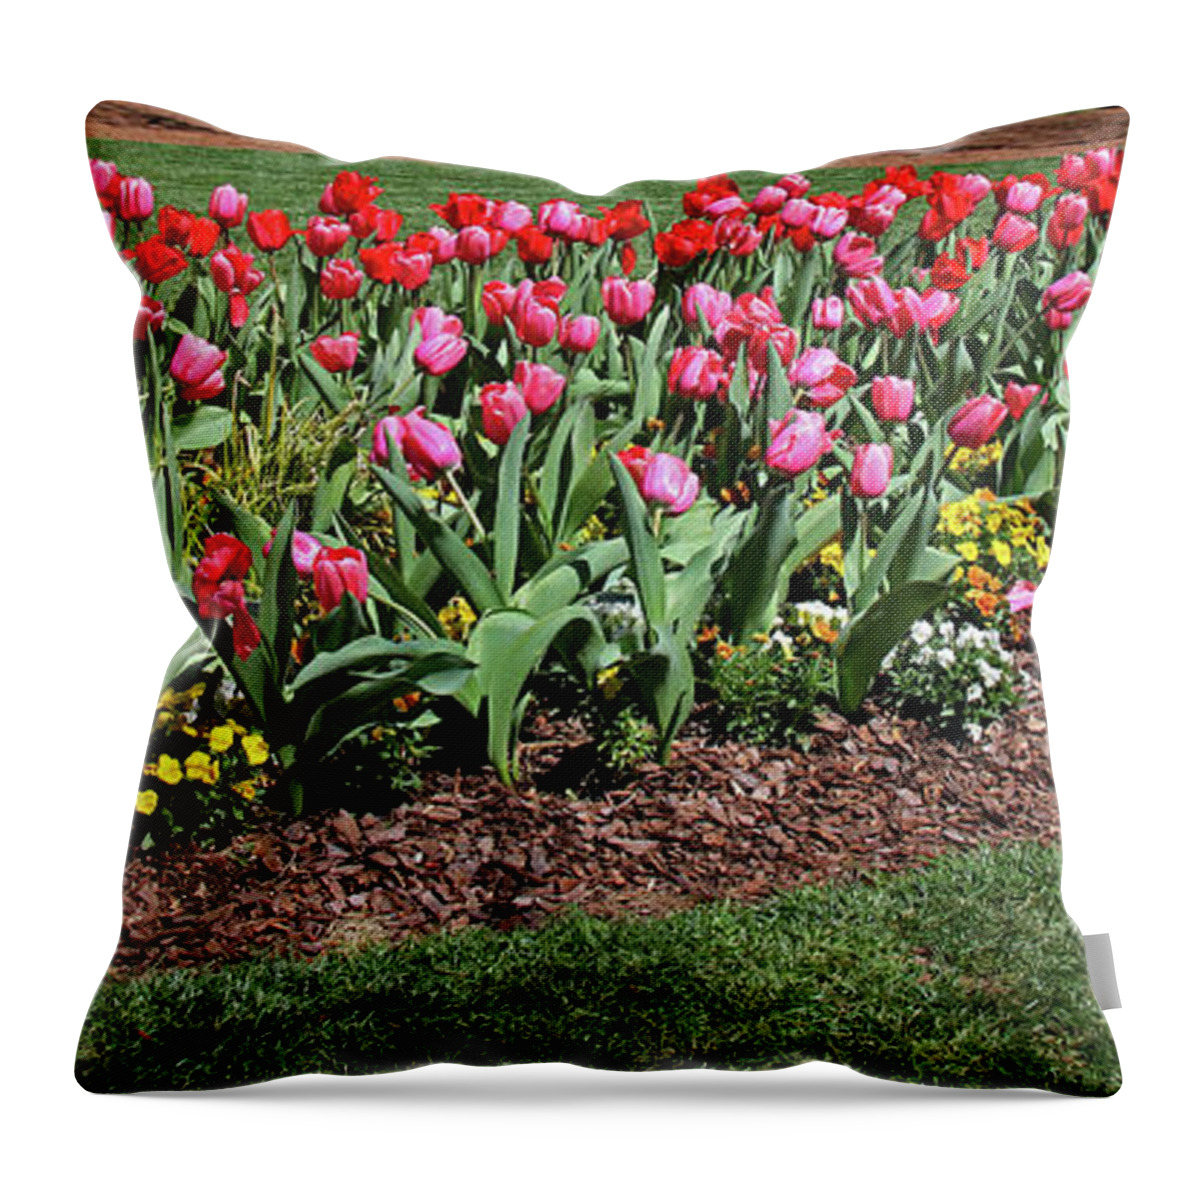 Tulips Throw Pillow featuring the photograph Tulips 4 by Richard Krebs